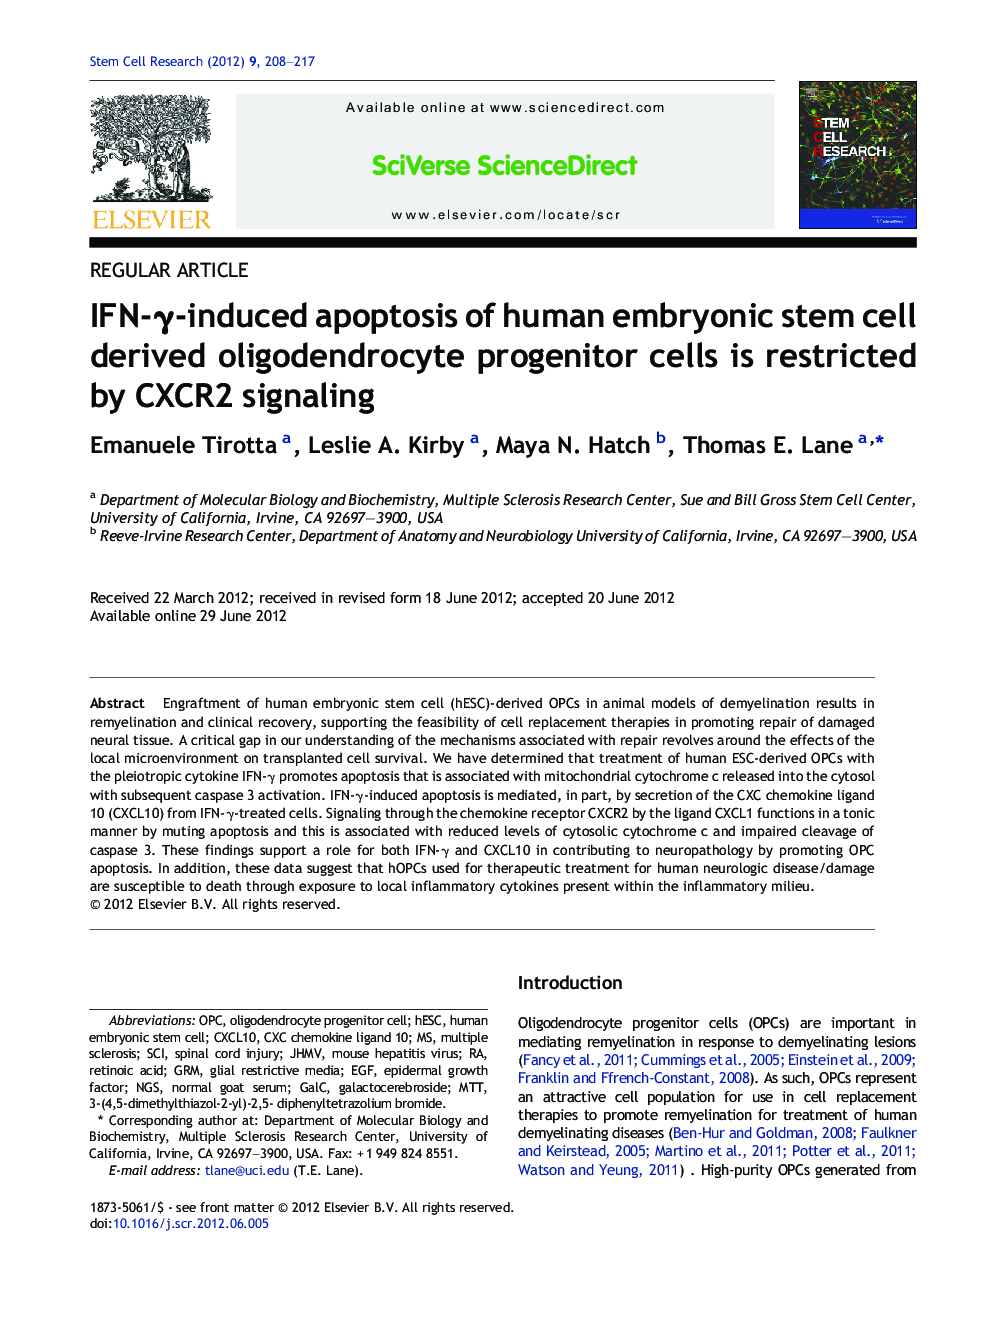 IFN-Î³-induced apoptosis of human embryonic stem cell derived oligodendrocyte progenitor cells is restricted by CXCR2 signaling